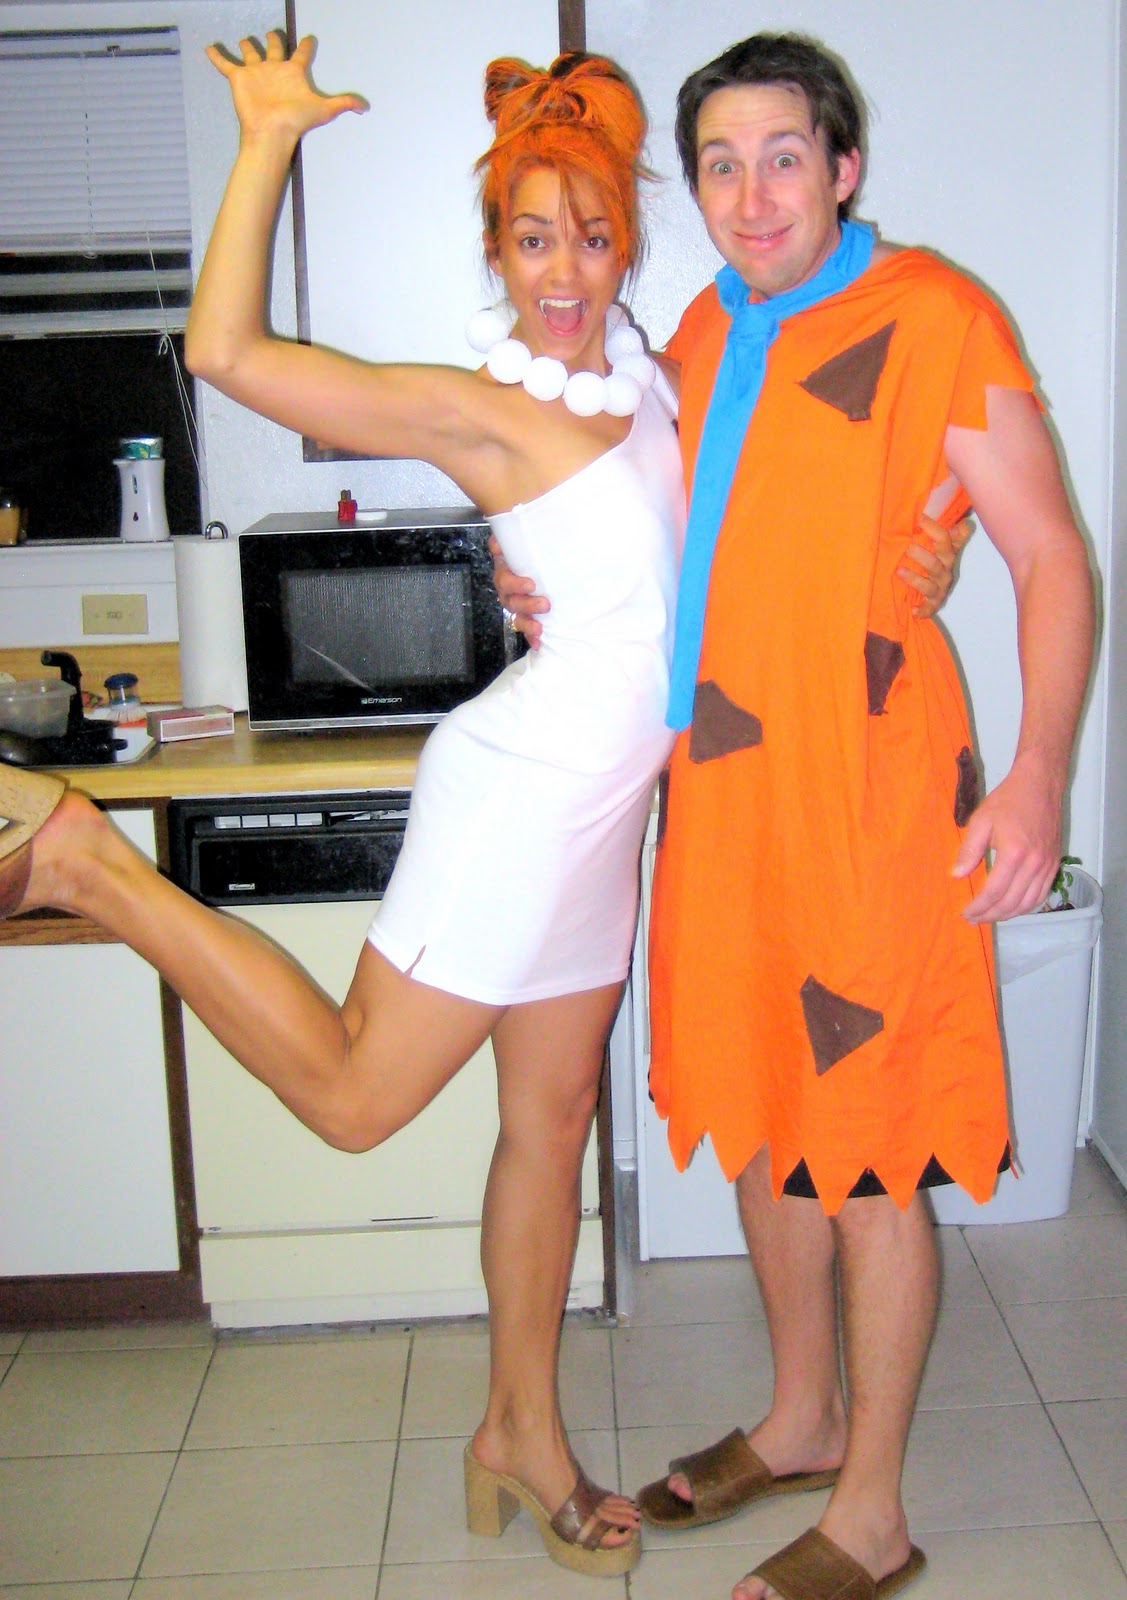 44 Homemade Halloween Costumes for Adults - C.R.A.F.T.